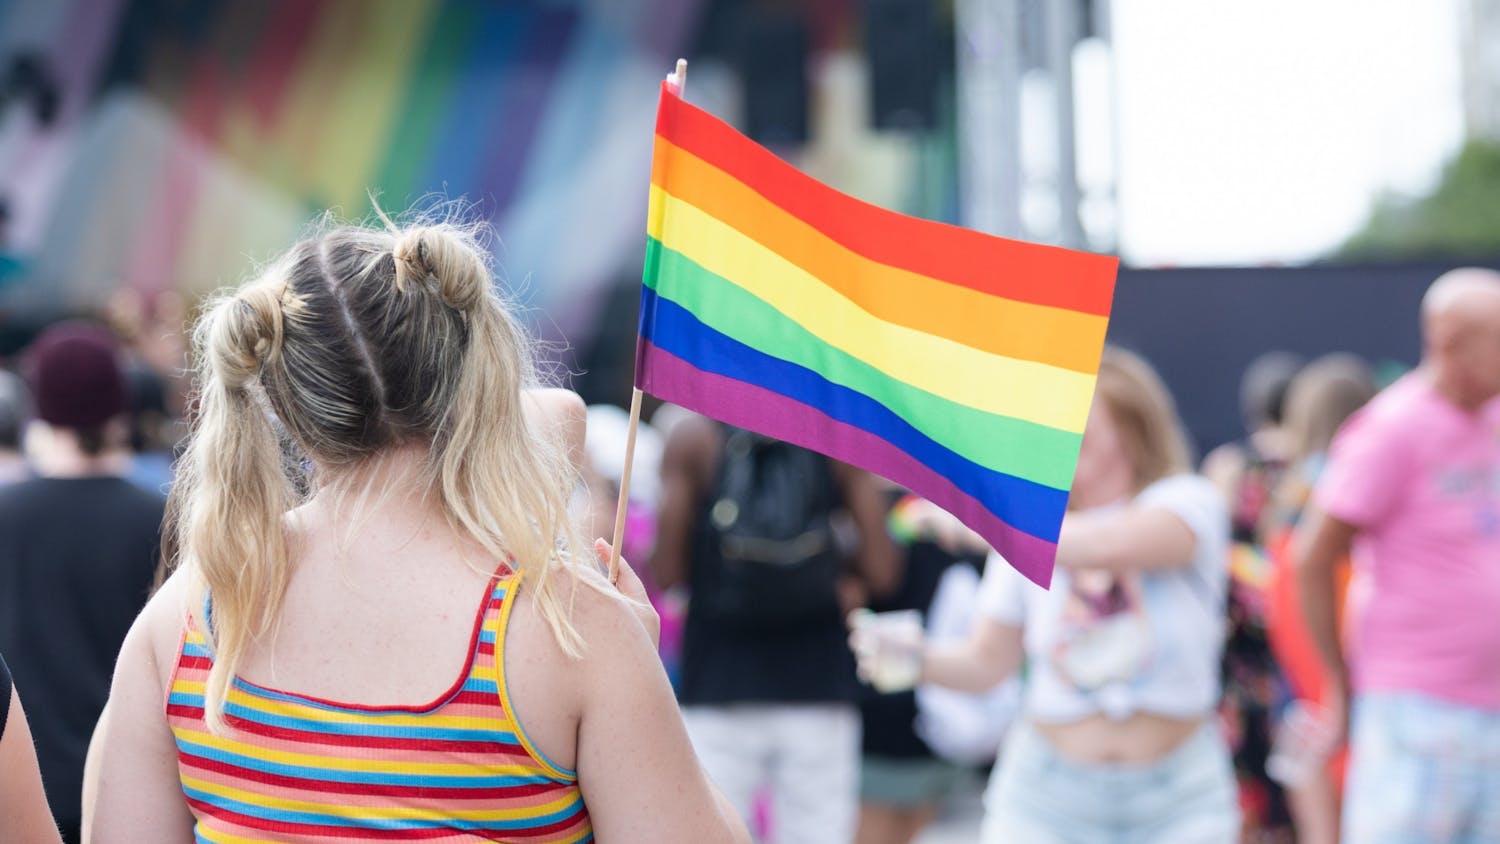 An Outfest attendee waves a rainbow flag on June 4, 2022. Outfest featured performances, food and vendors in honor of Pride month.&nbsp;